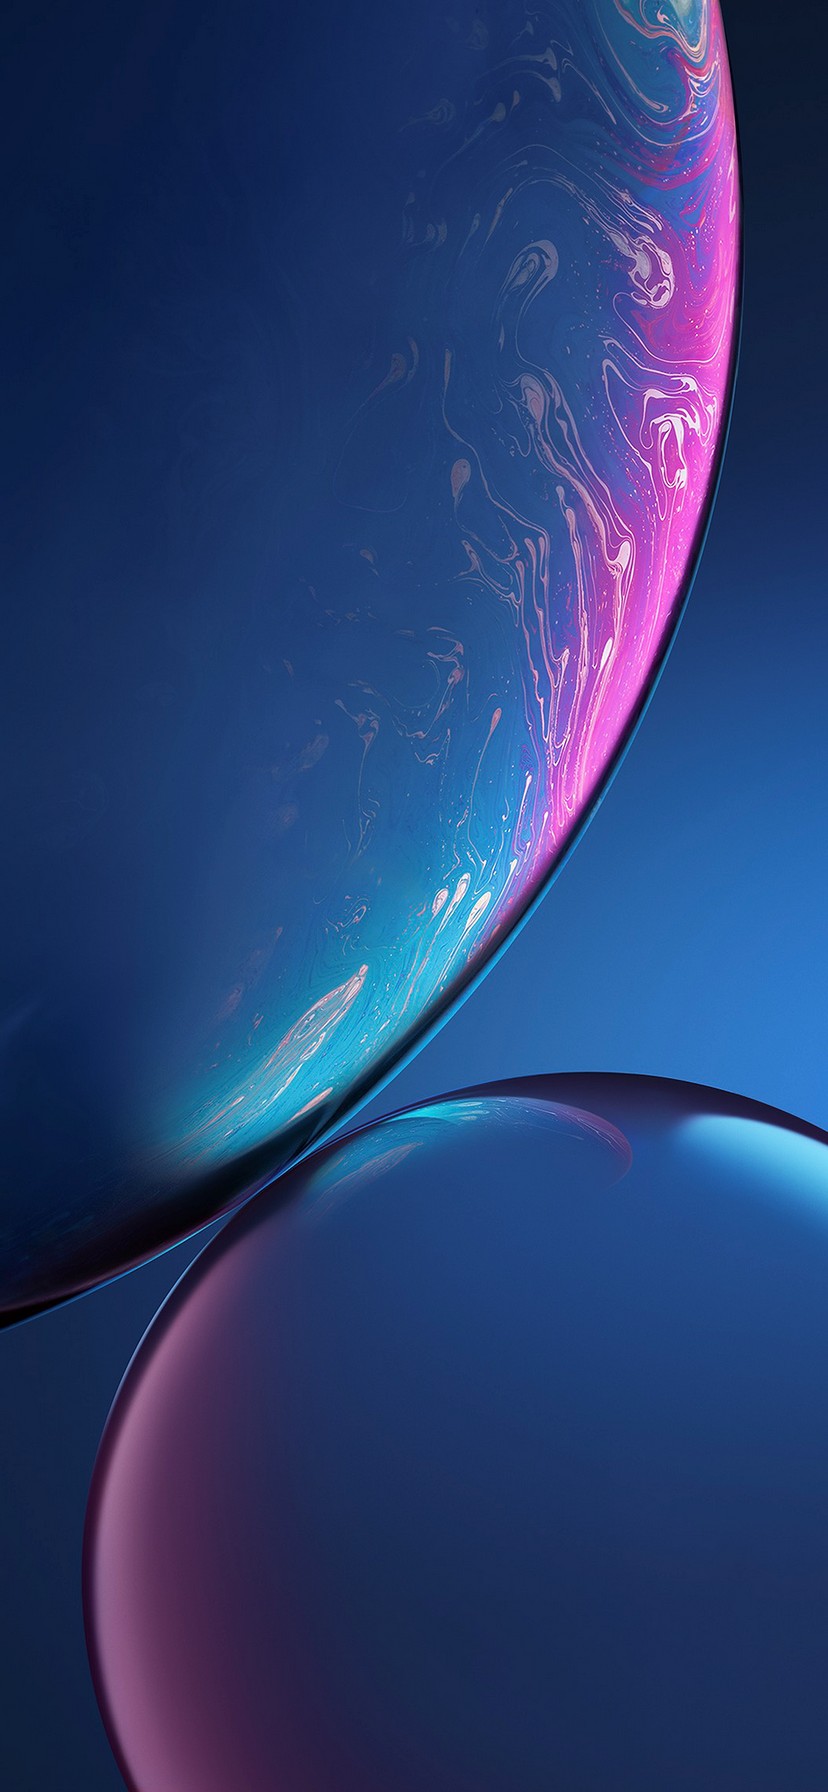 Screensaver iPhone XR With high-resolution 828X1792 pixel. You can set as wallpaper for Apple iPhone X, XS Max, XR, 8, 7, 6, SE, iPad. Enjoy and share your favorite HD wallpapers and background images